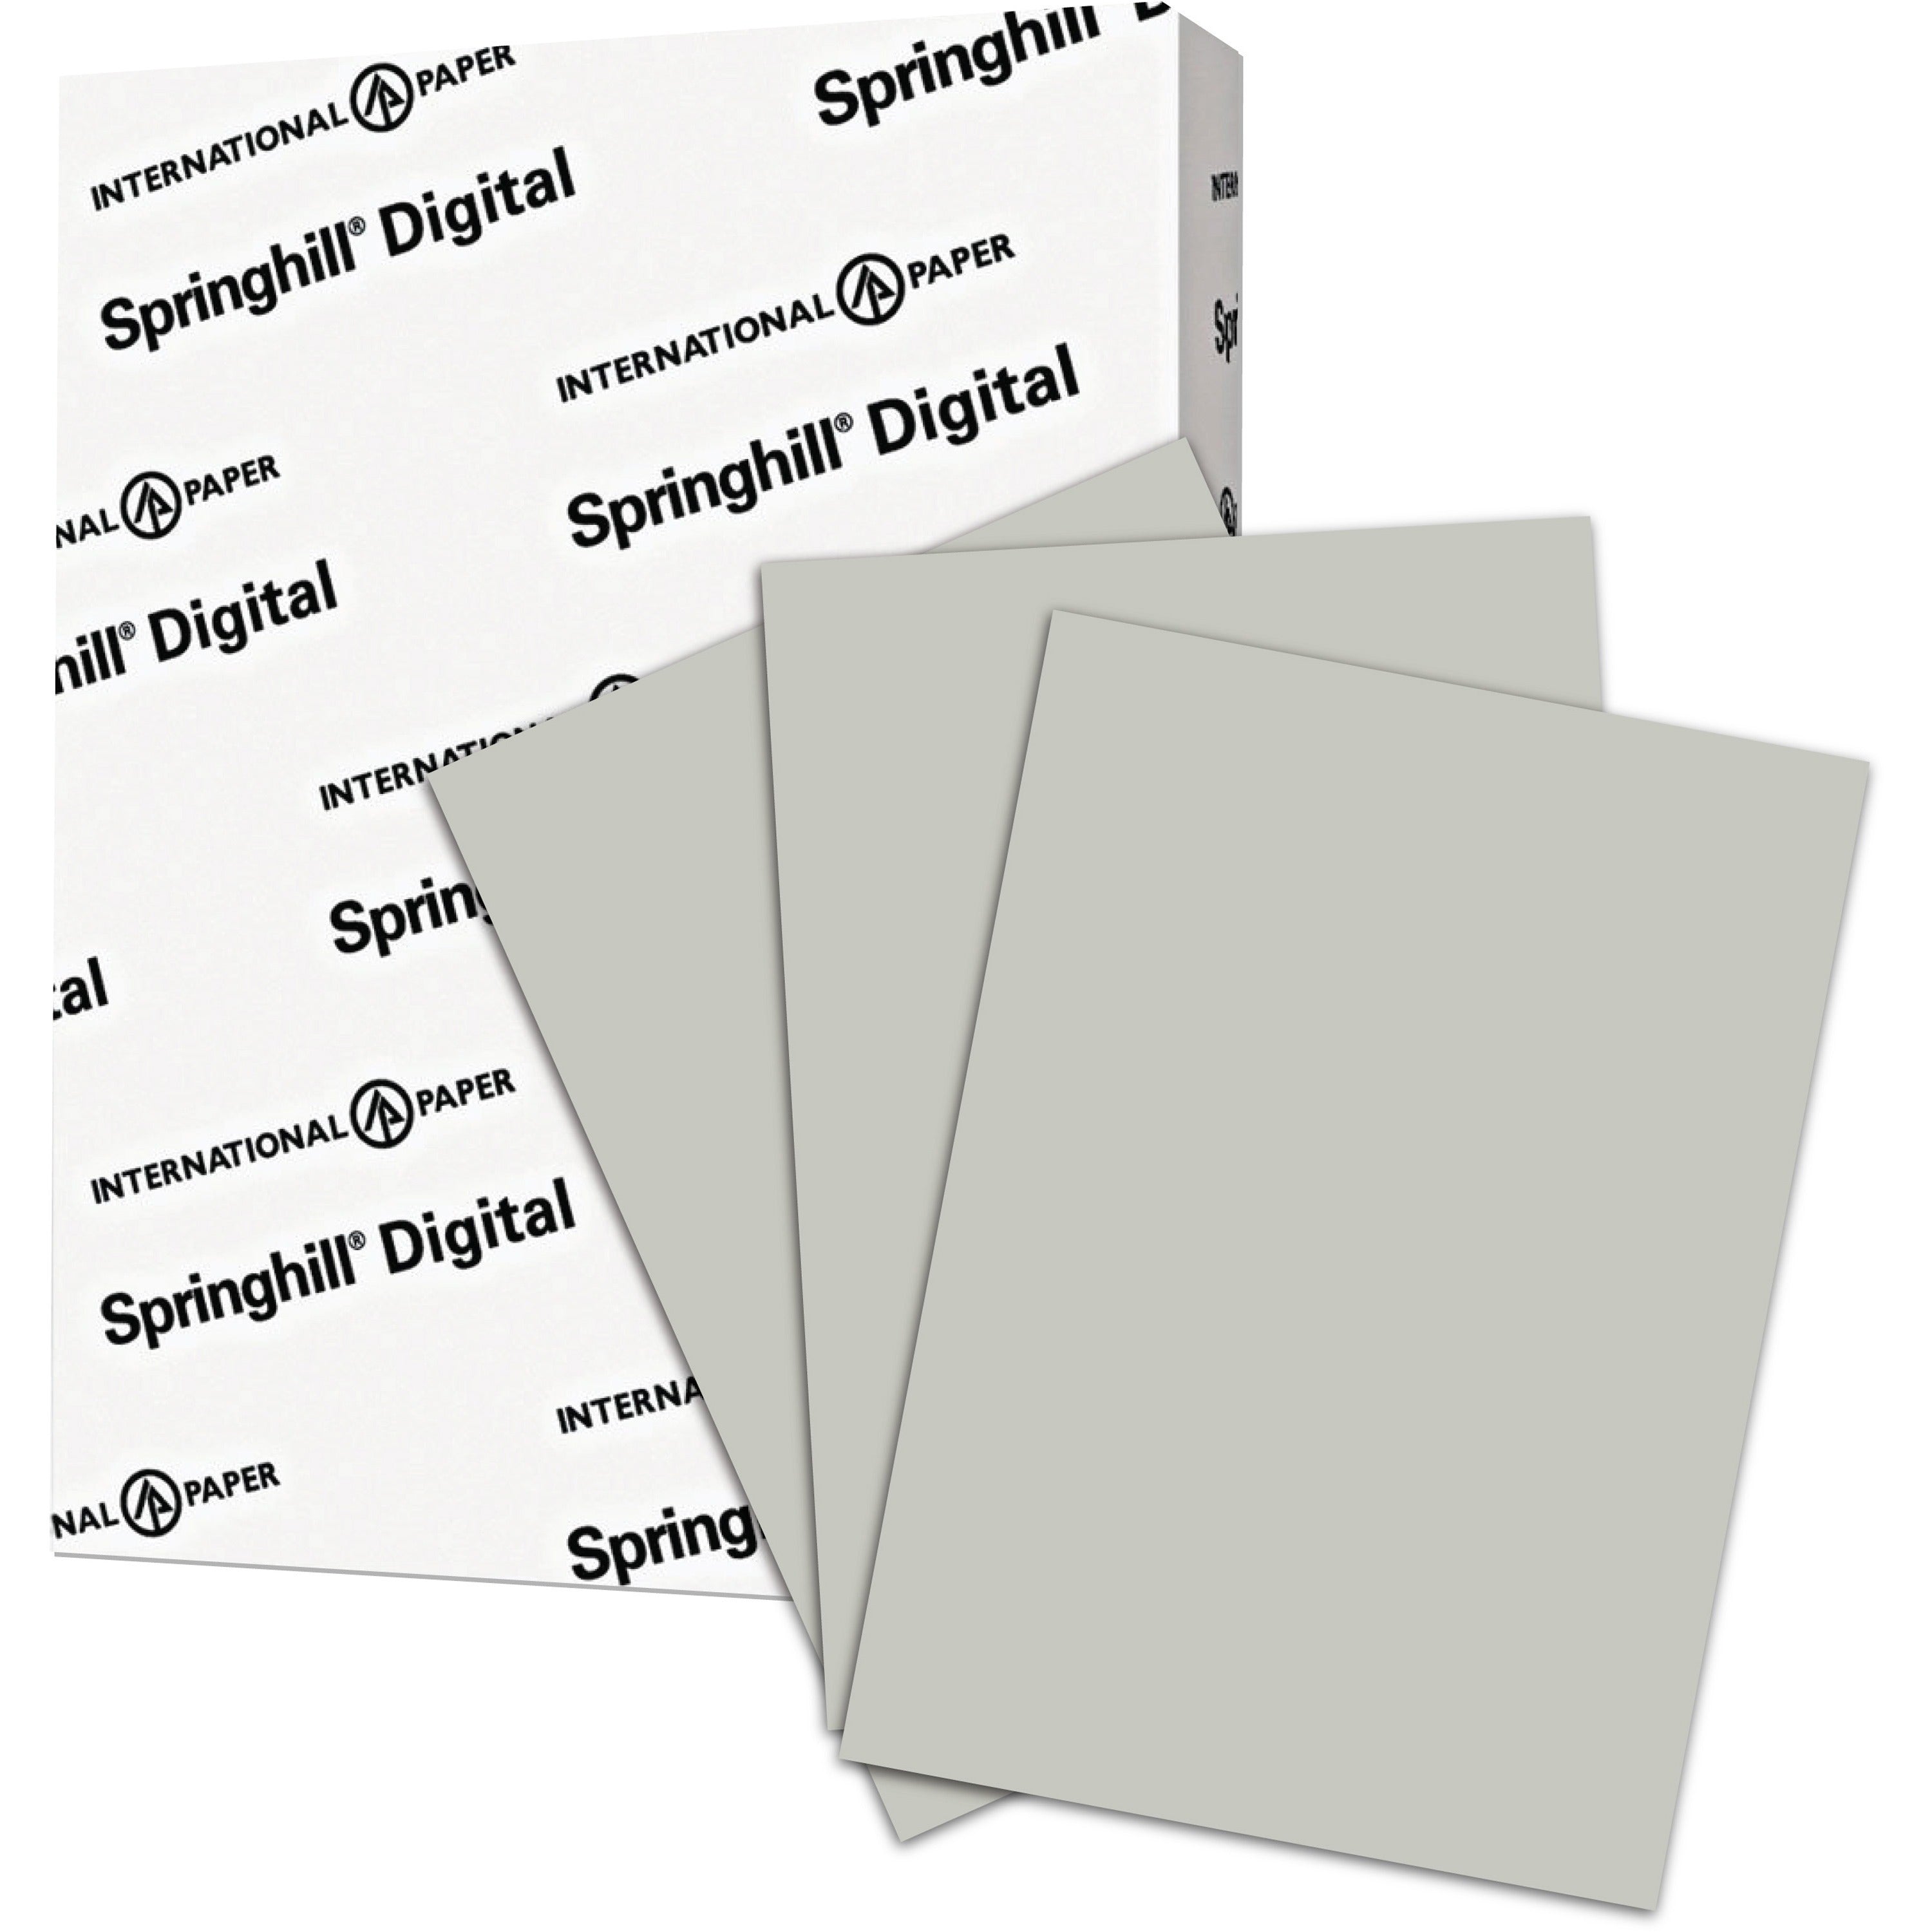 Springhill Multipurpose Cardstock - Gray - 92 Brightness - Letter - 8 1/2" x 11" - 110 lb Basis Weight - Smooth, Vellum - 250 / Pack - Gray - 